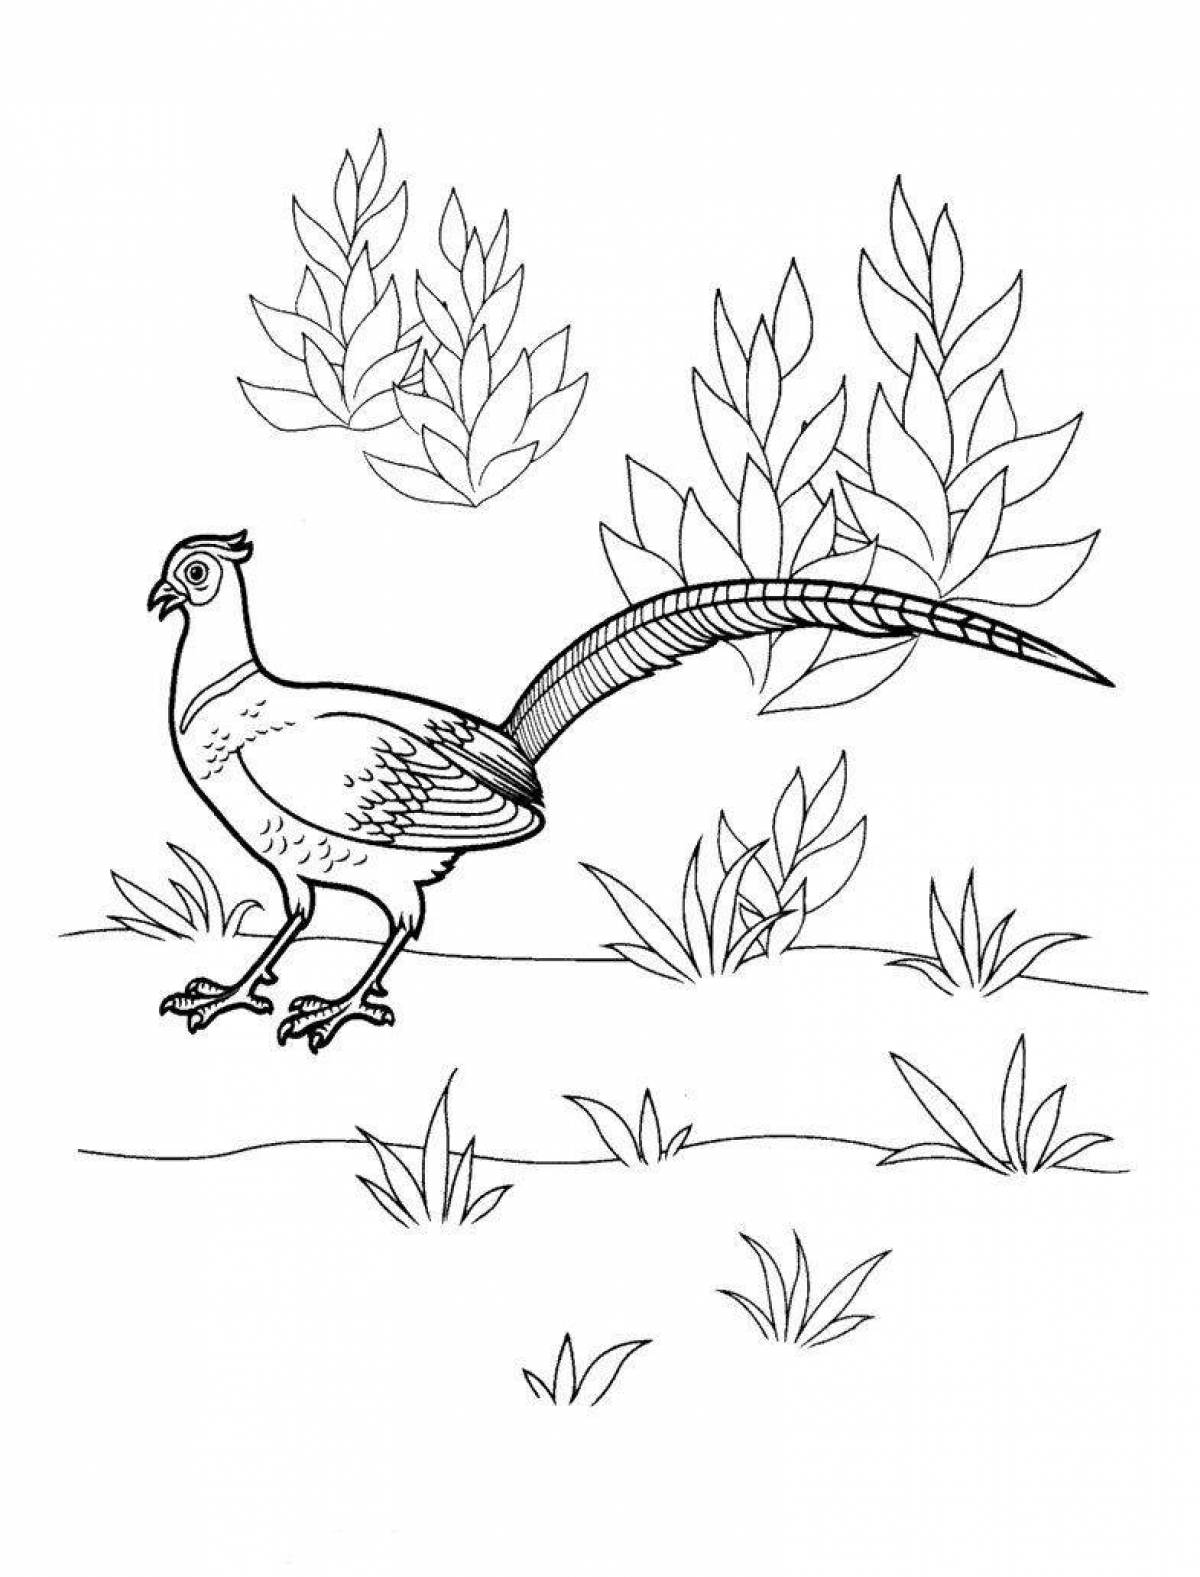 Fluffy animal and bird coloring pages